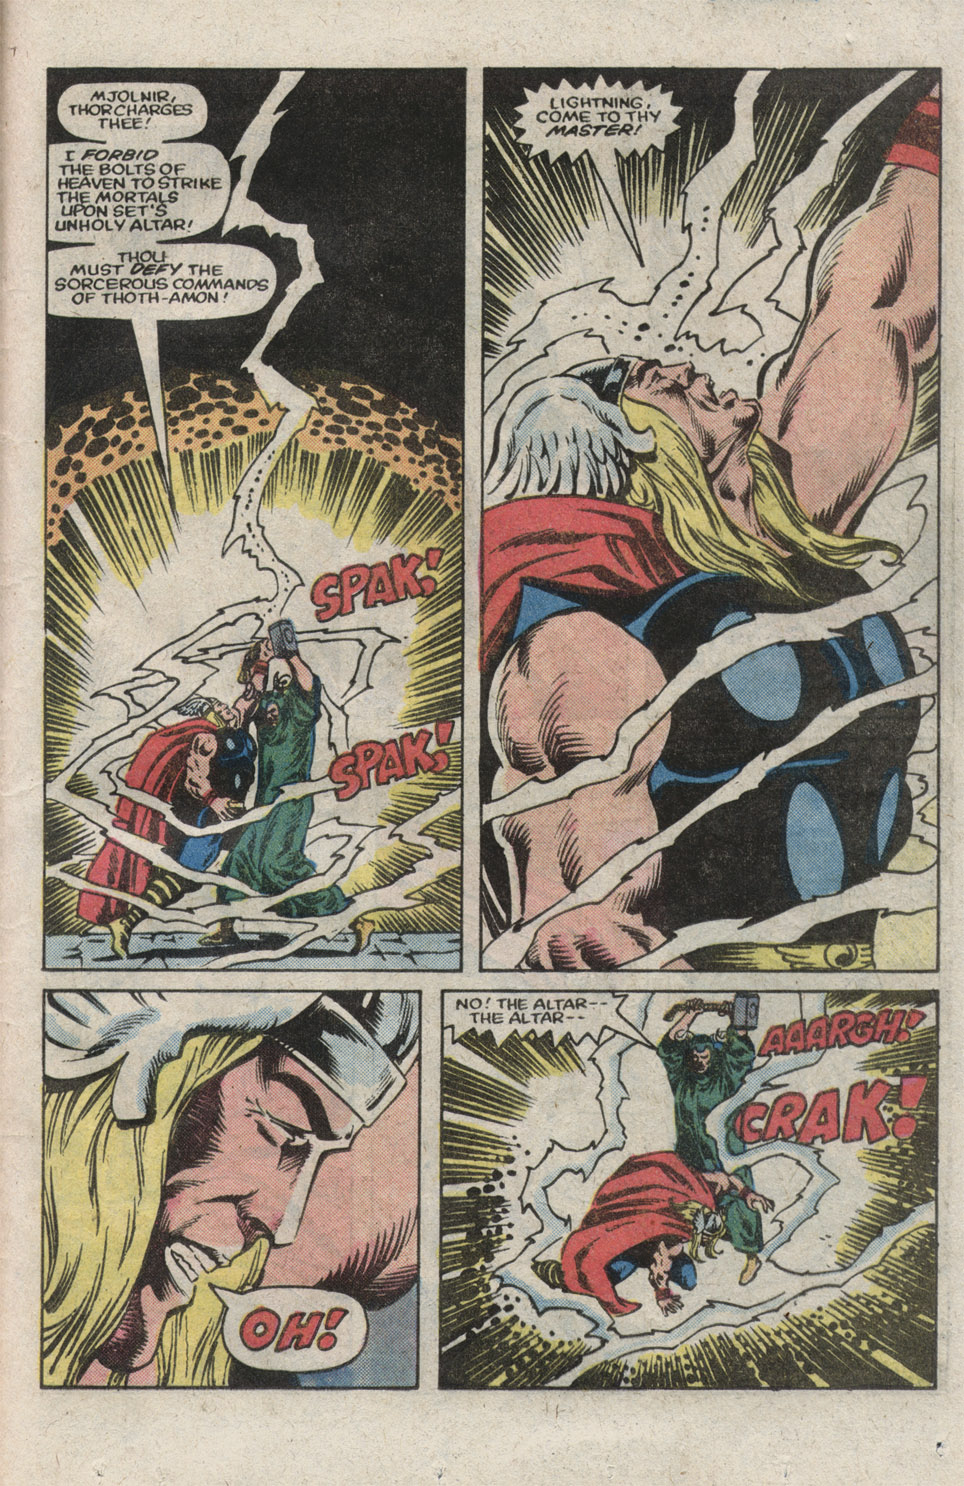 What If? (1977) issue 39 - Thor battled conan - Page 41